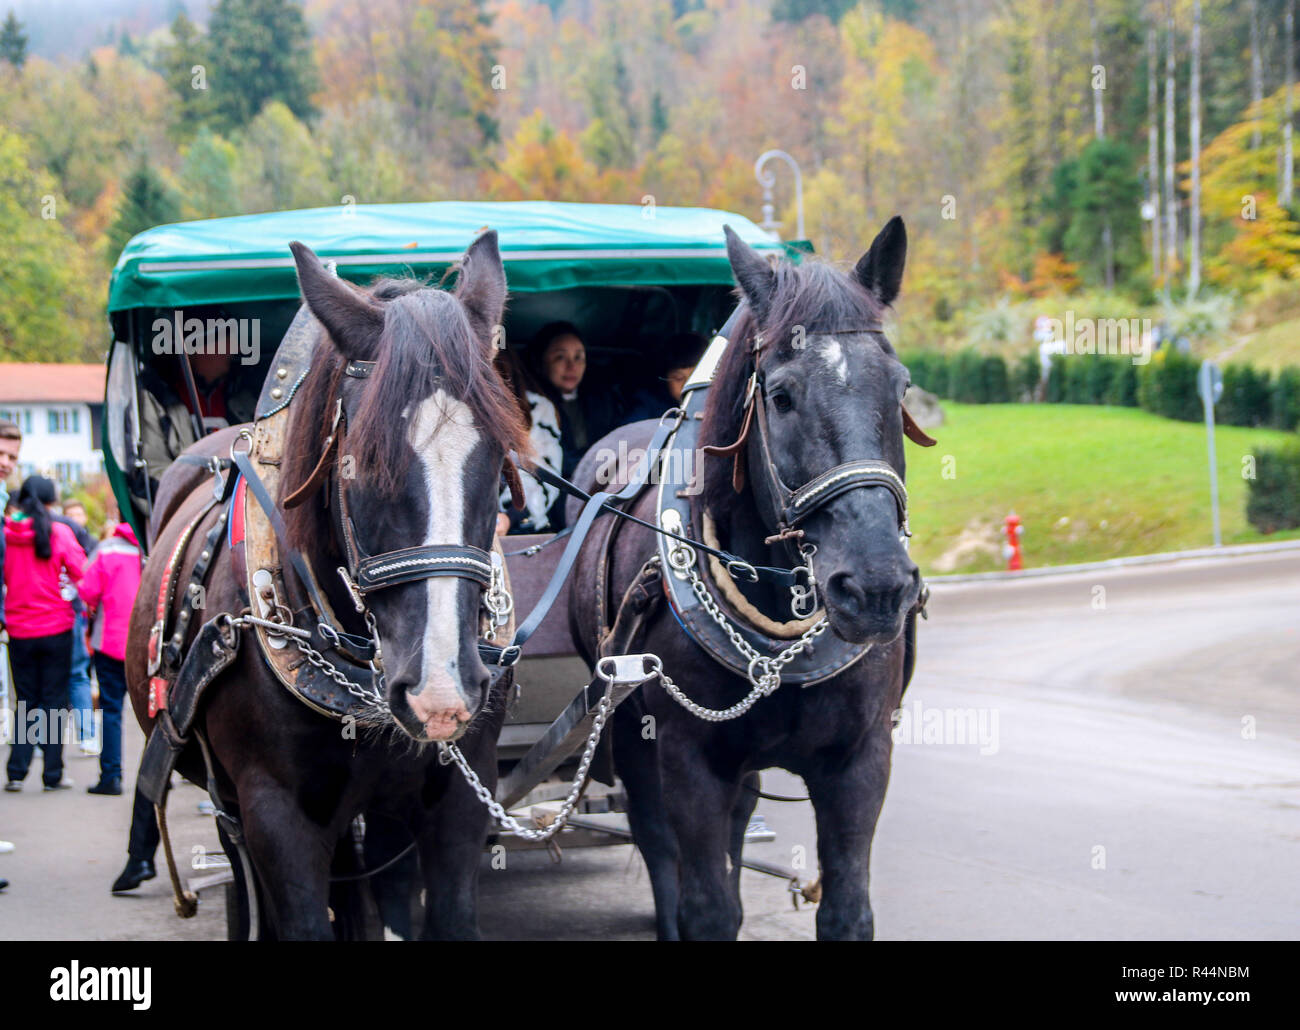 Horse & Carriage trips, Neuschwanstein Castle, Munich Bavaria Germany Bavarian concept, things to do, tours, horses carriage ride, tourists exploring Stock Photo